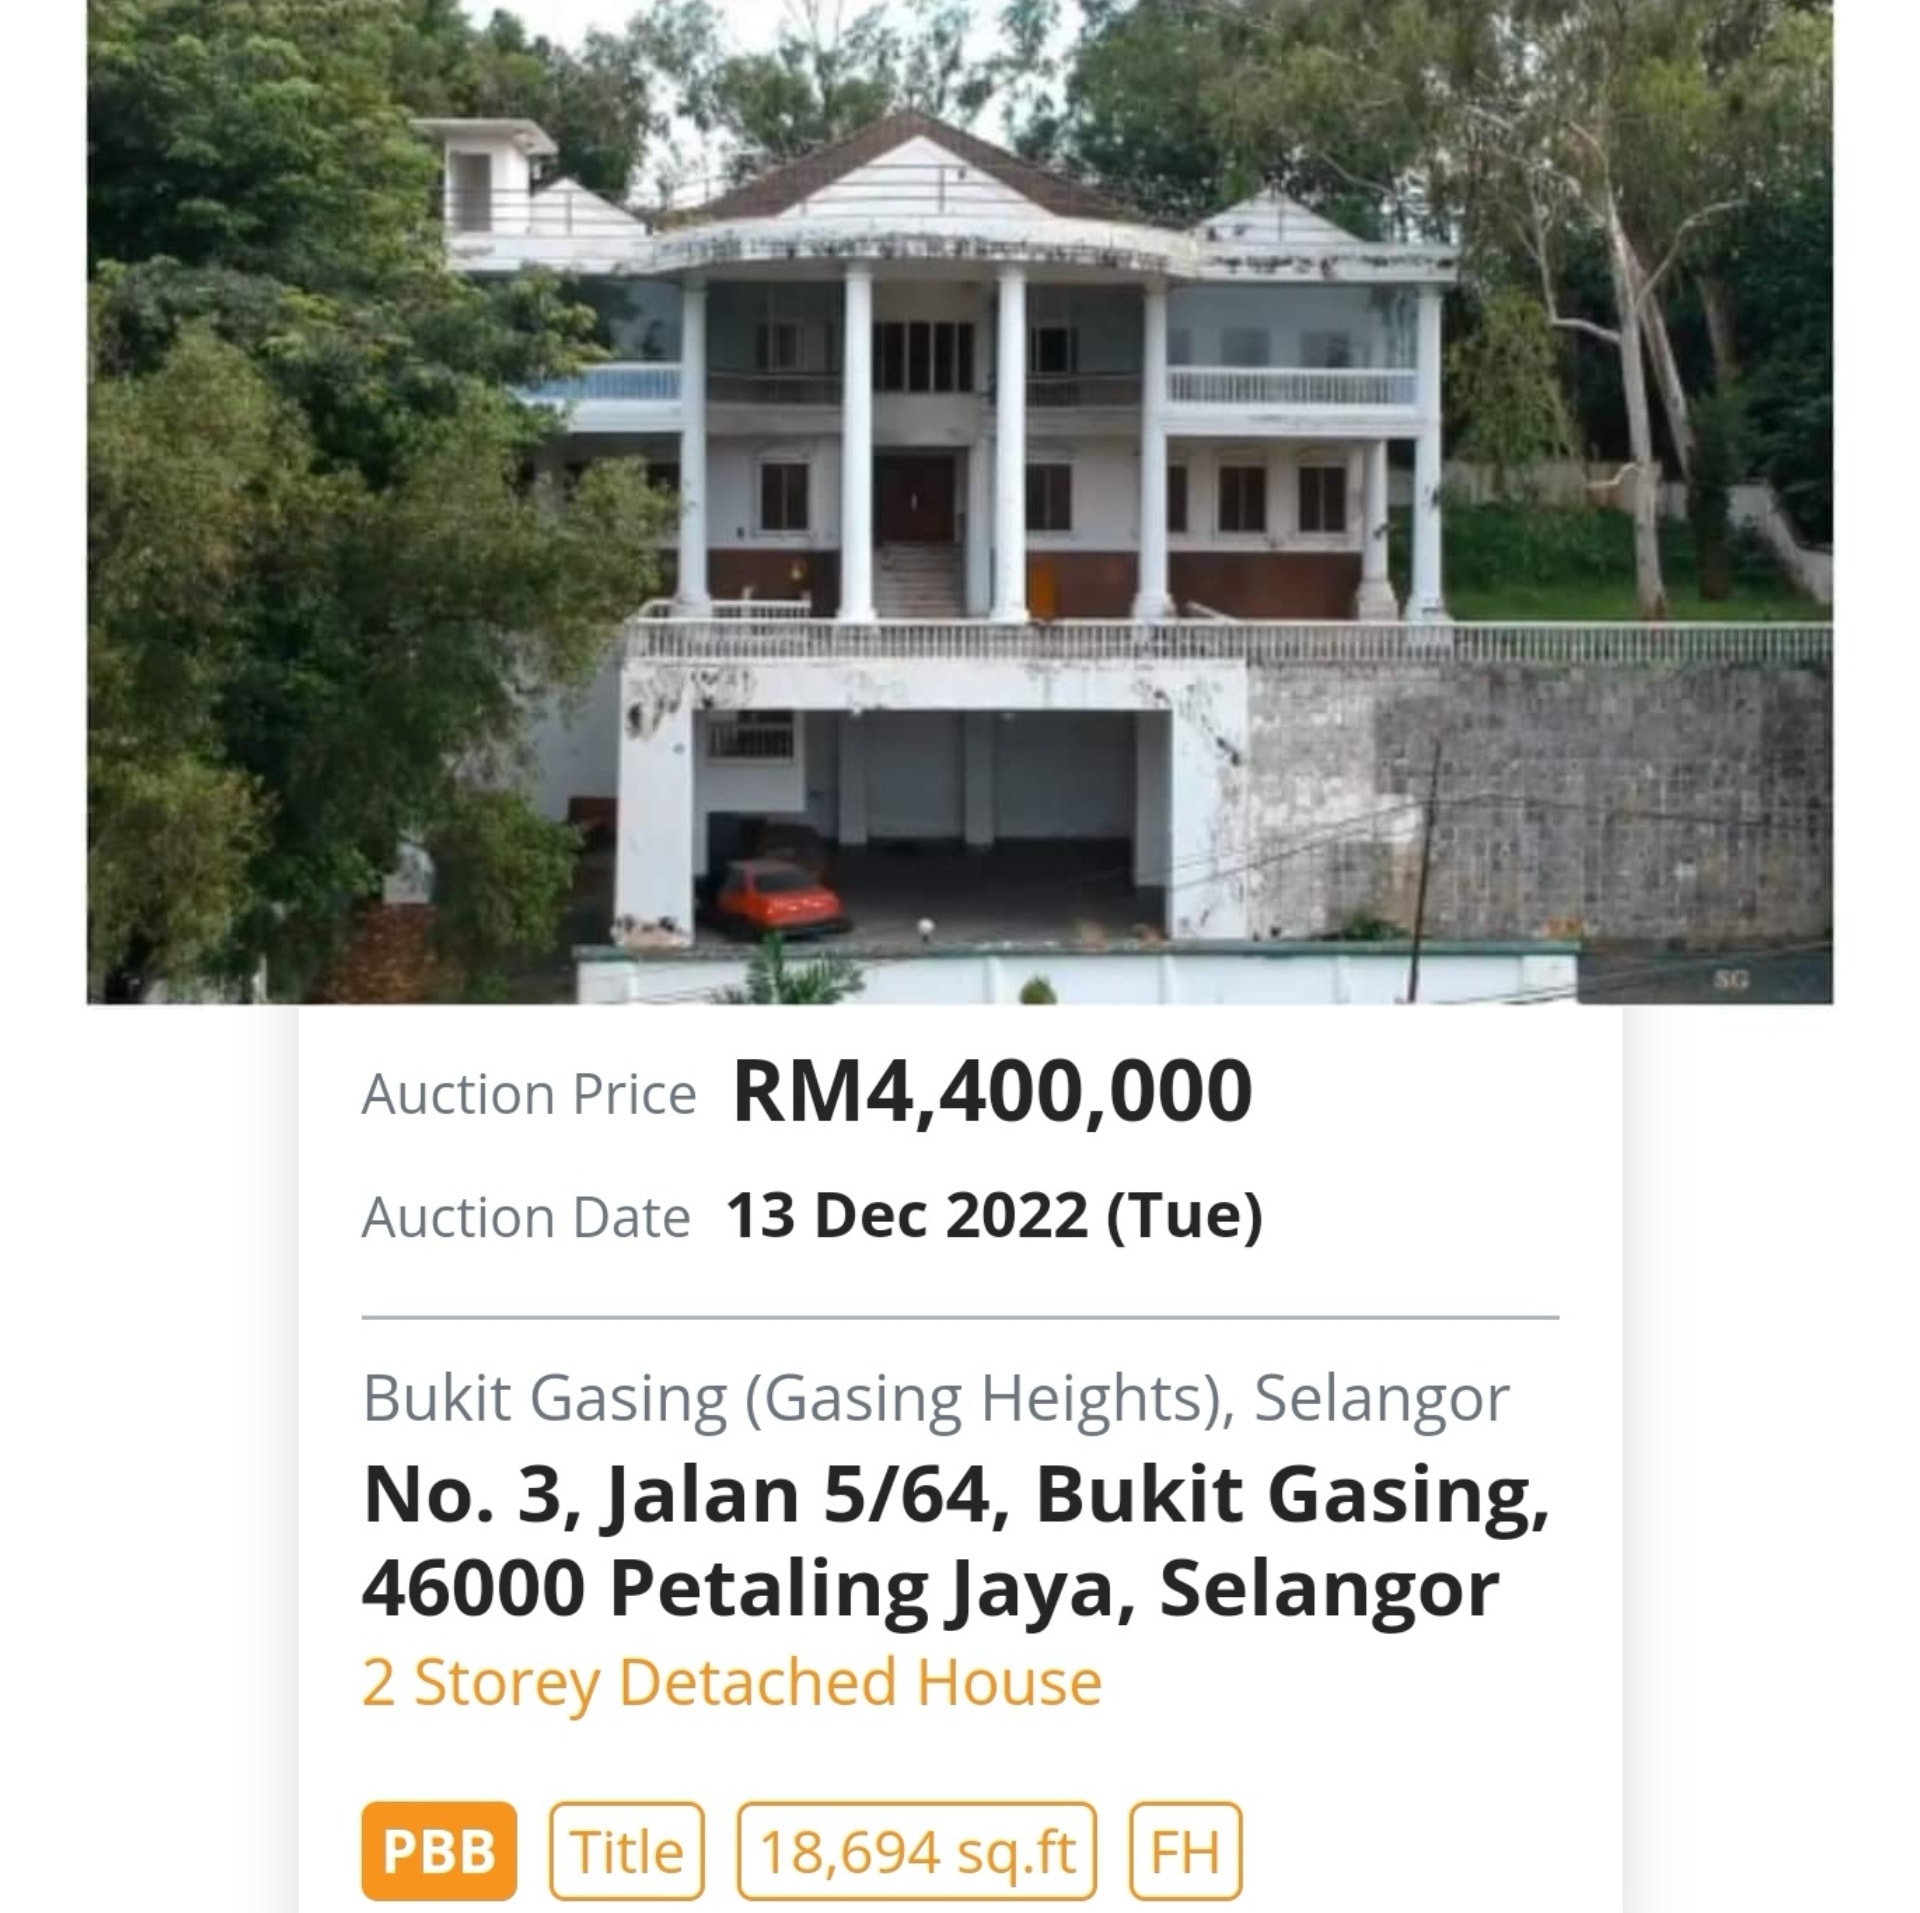 Image from Selangor Auction Property (Facebook)